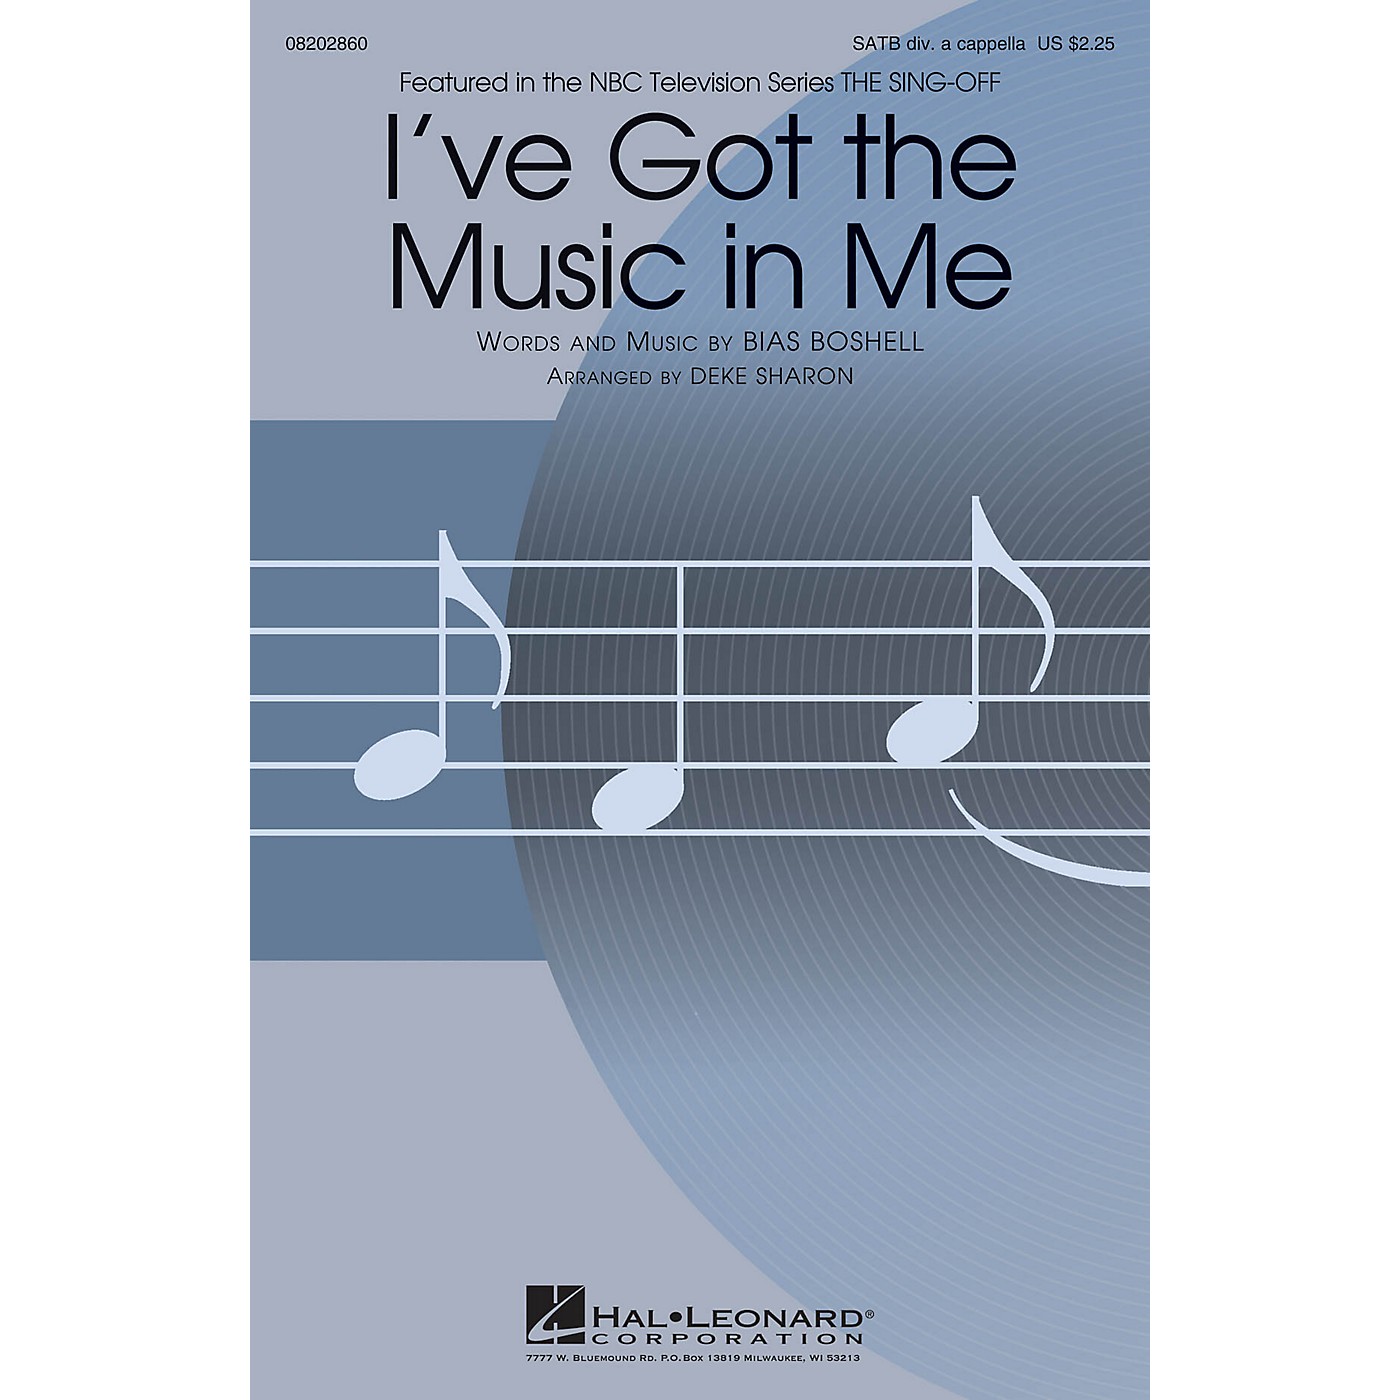 Hal Leonard I've Got the Music in Me (from The Sing-Off) SATB A Cappella arranged by Deke Sharon thumbnail